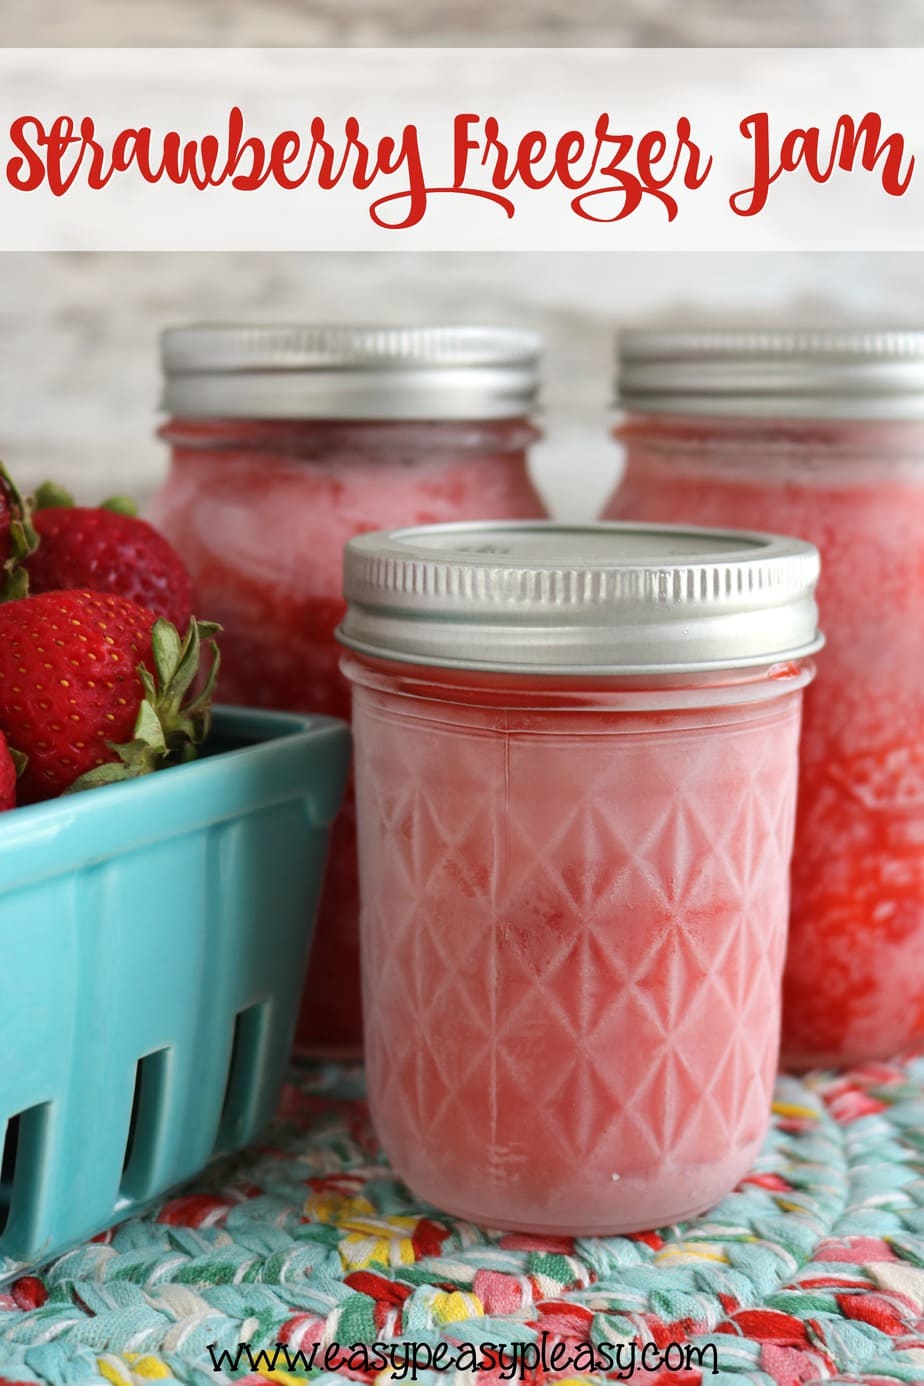 Grab this super easy Strawberry Freezer Jam recipe and find out how to use up a flat of strawberries.